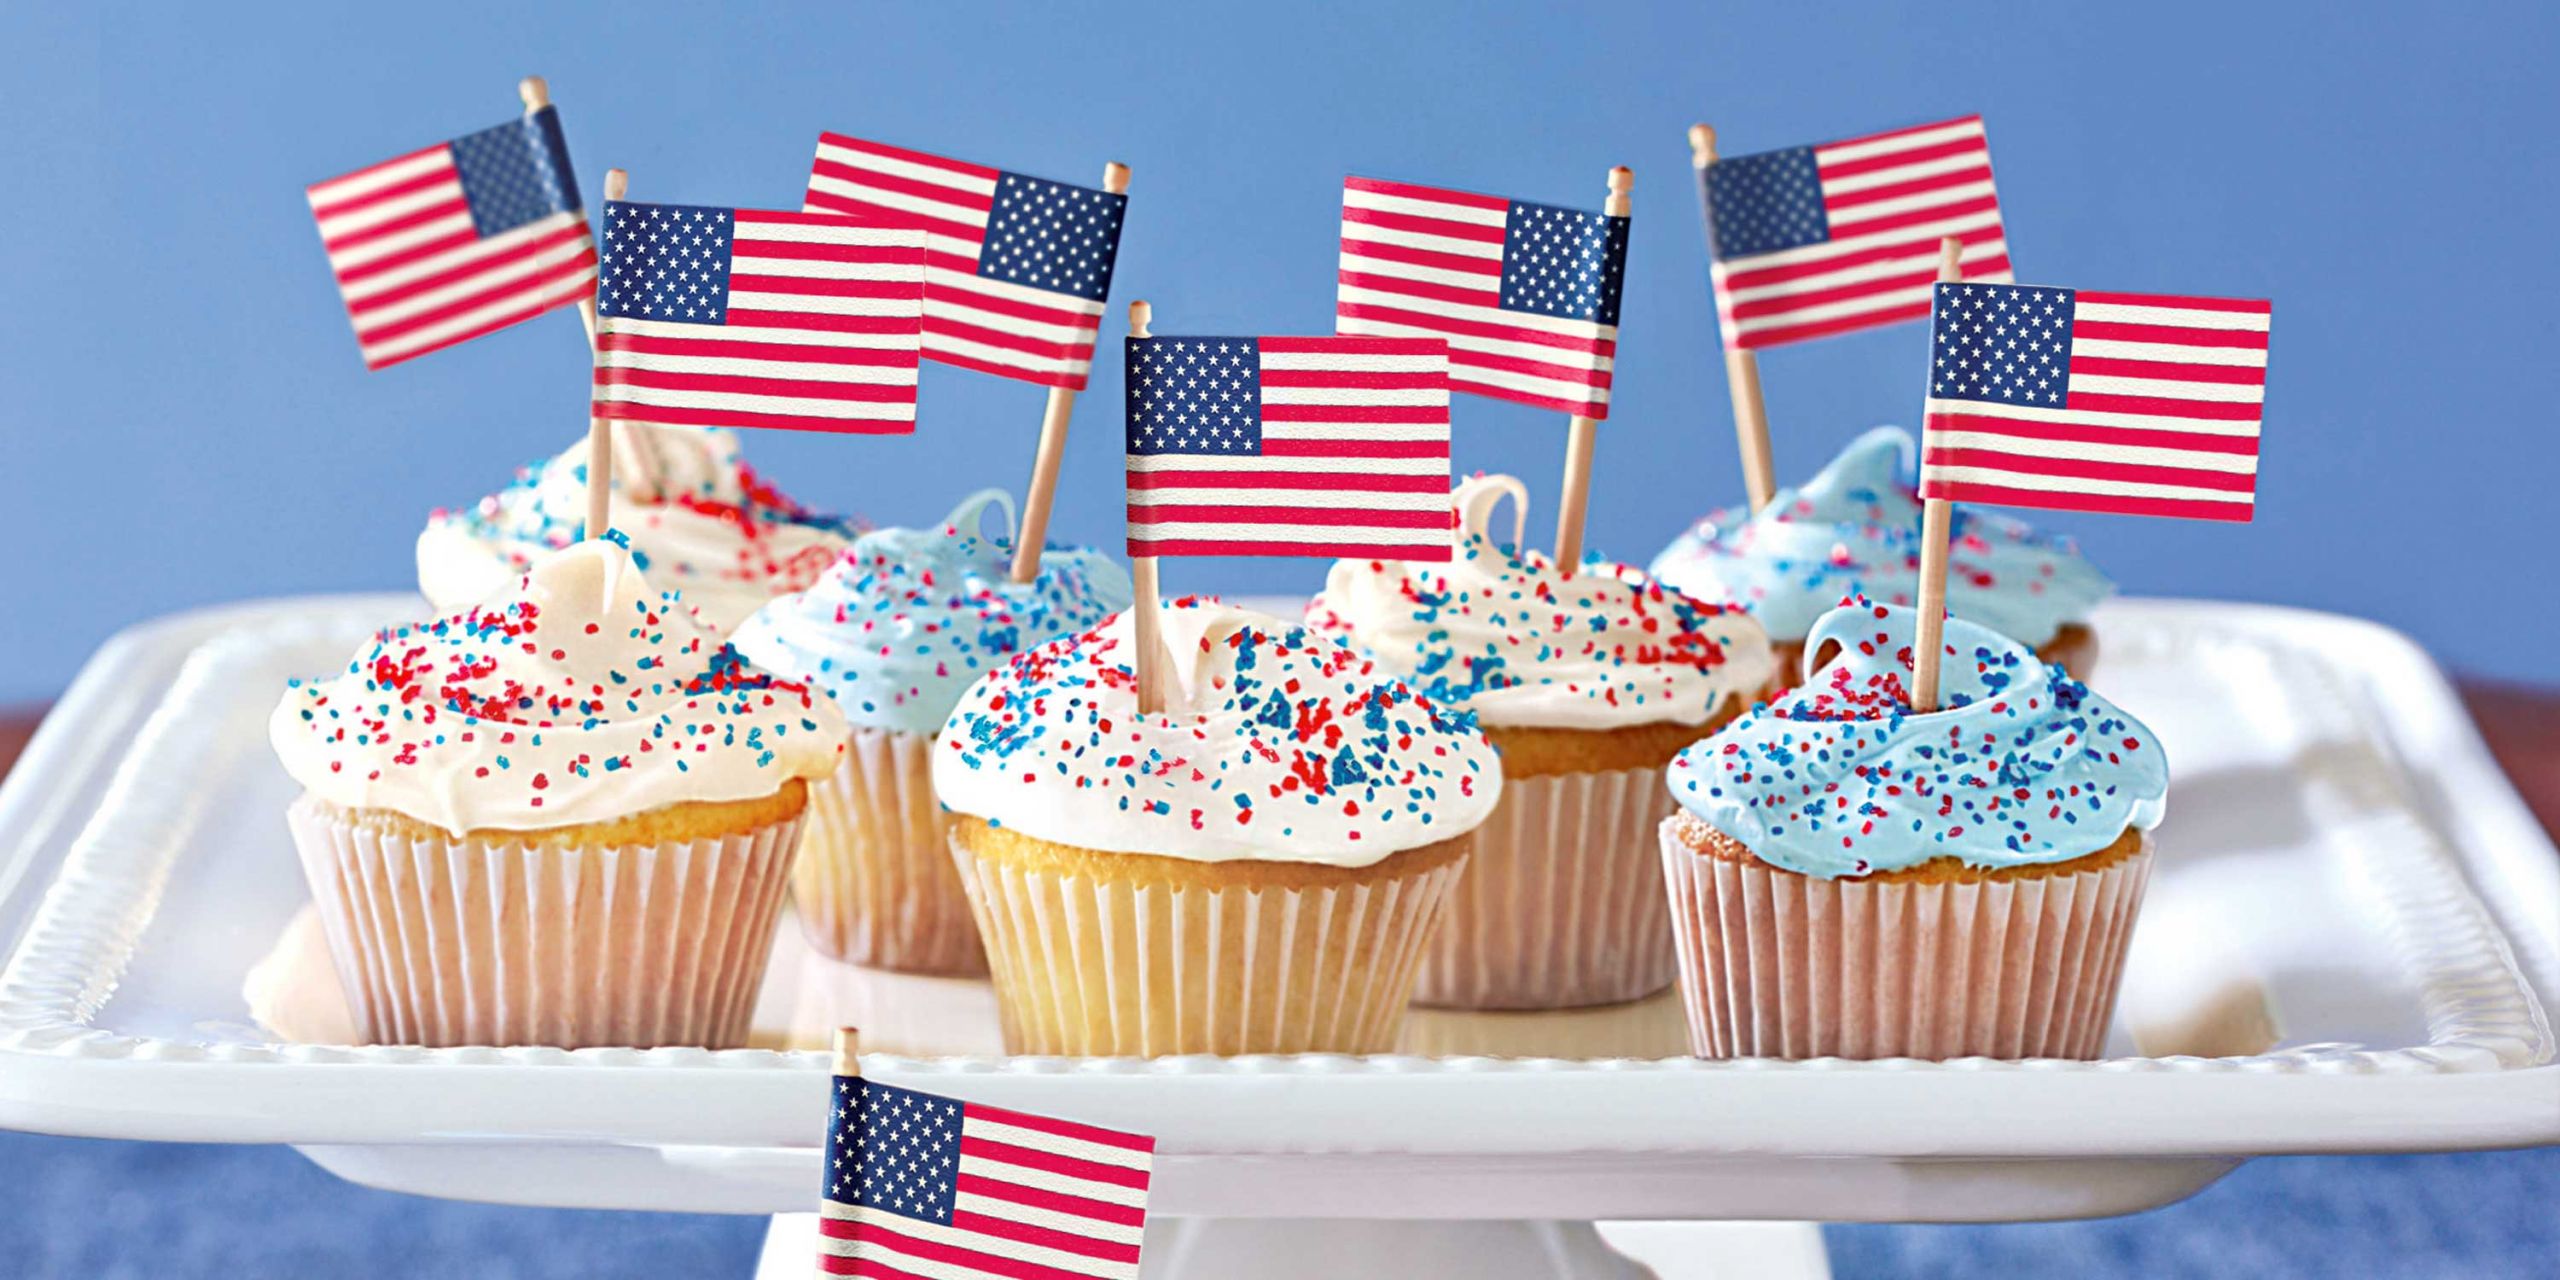 4th Of July Cupcake Ideas
 17 Easy 4th of July Cupcake & Cakes — Recipes for Fourth